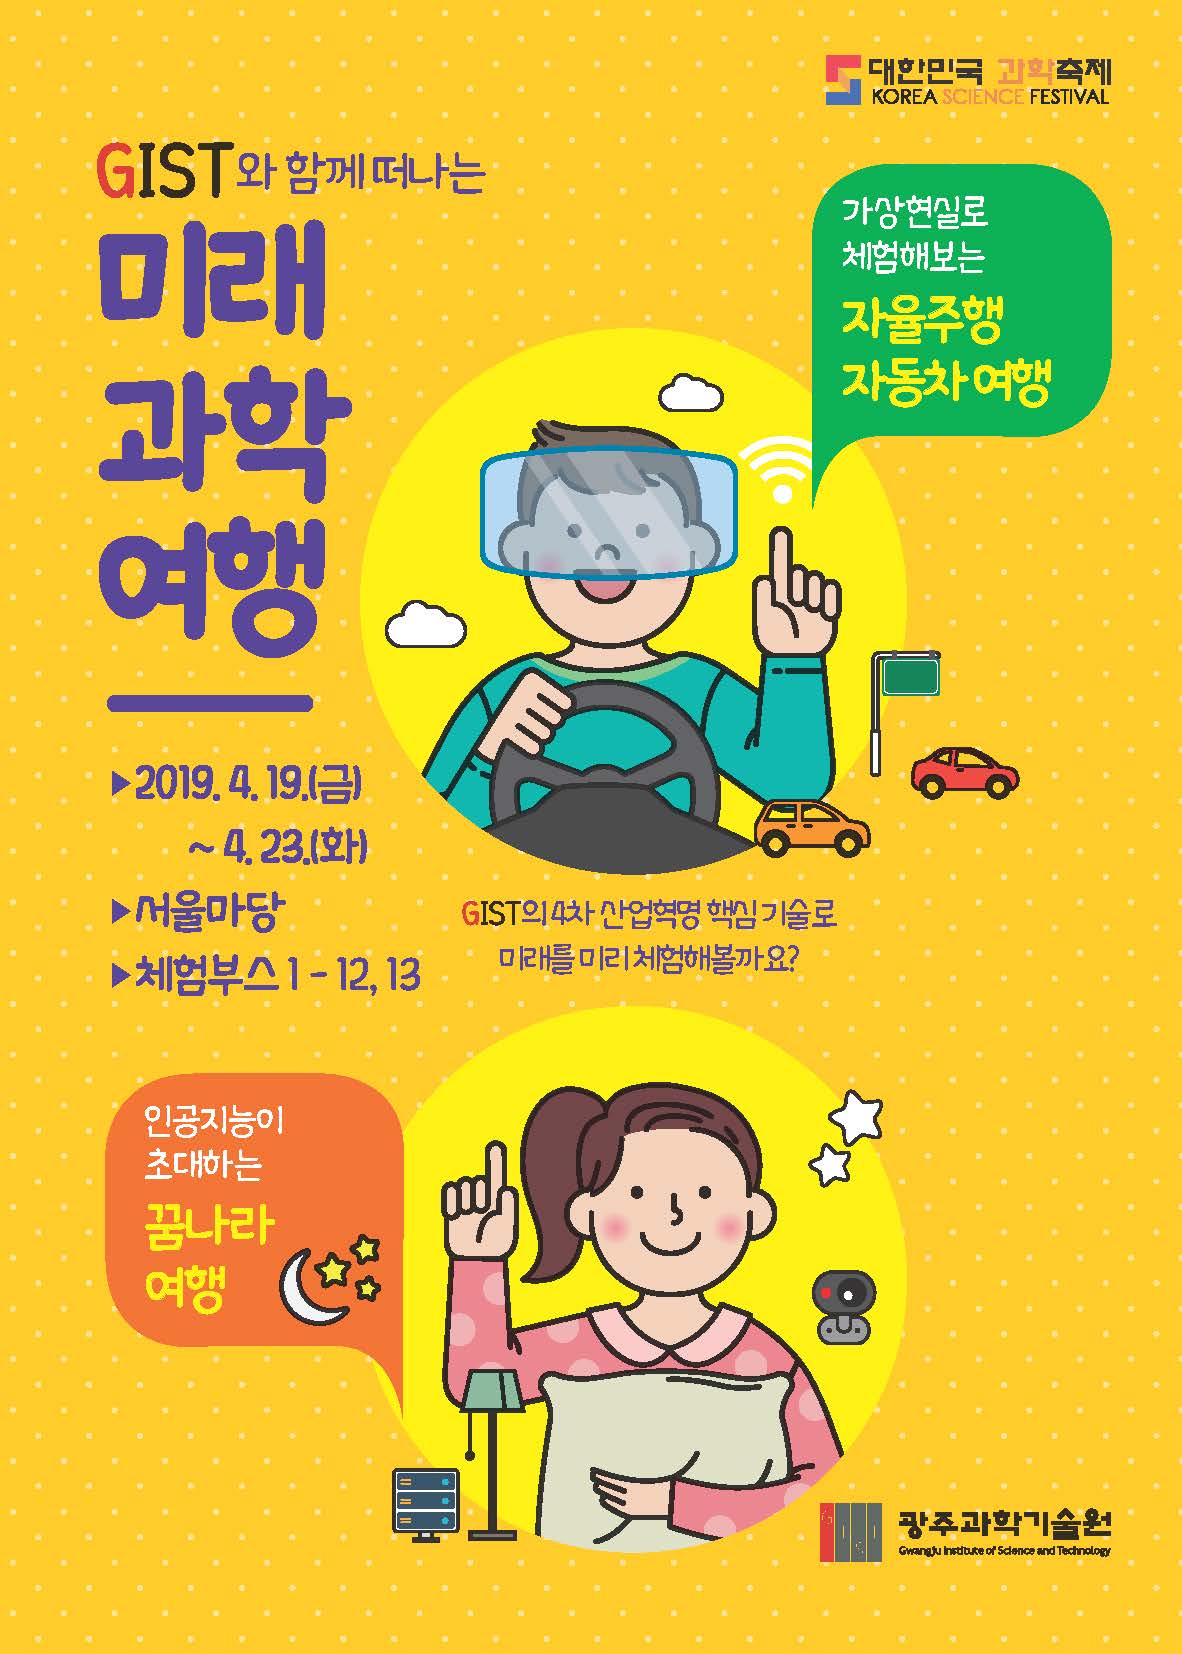 GIST AI research achievements will be shown at the 2019 Korean Science Festival 이미지